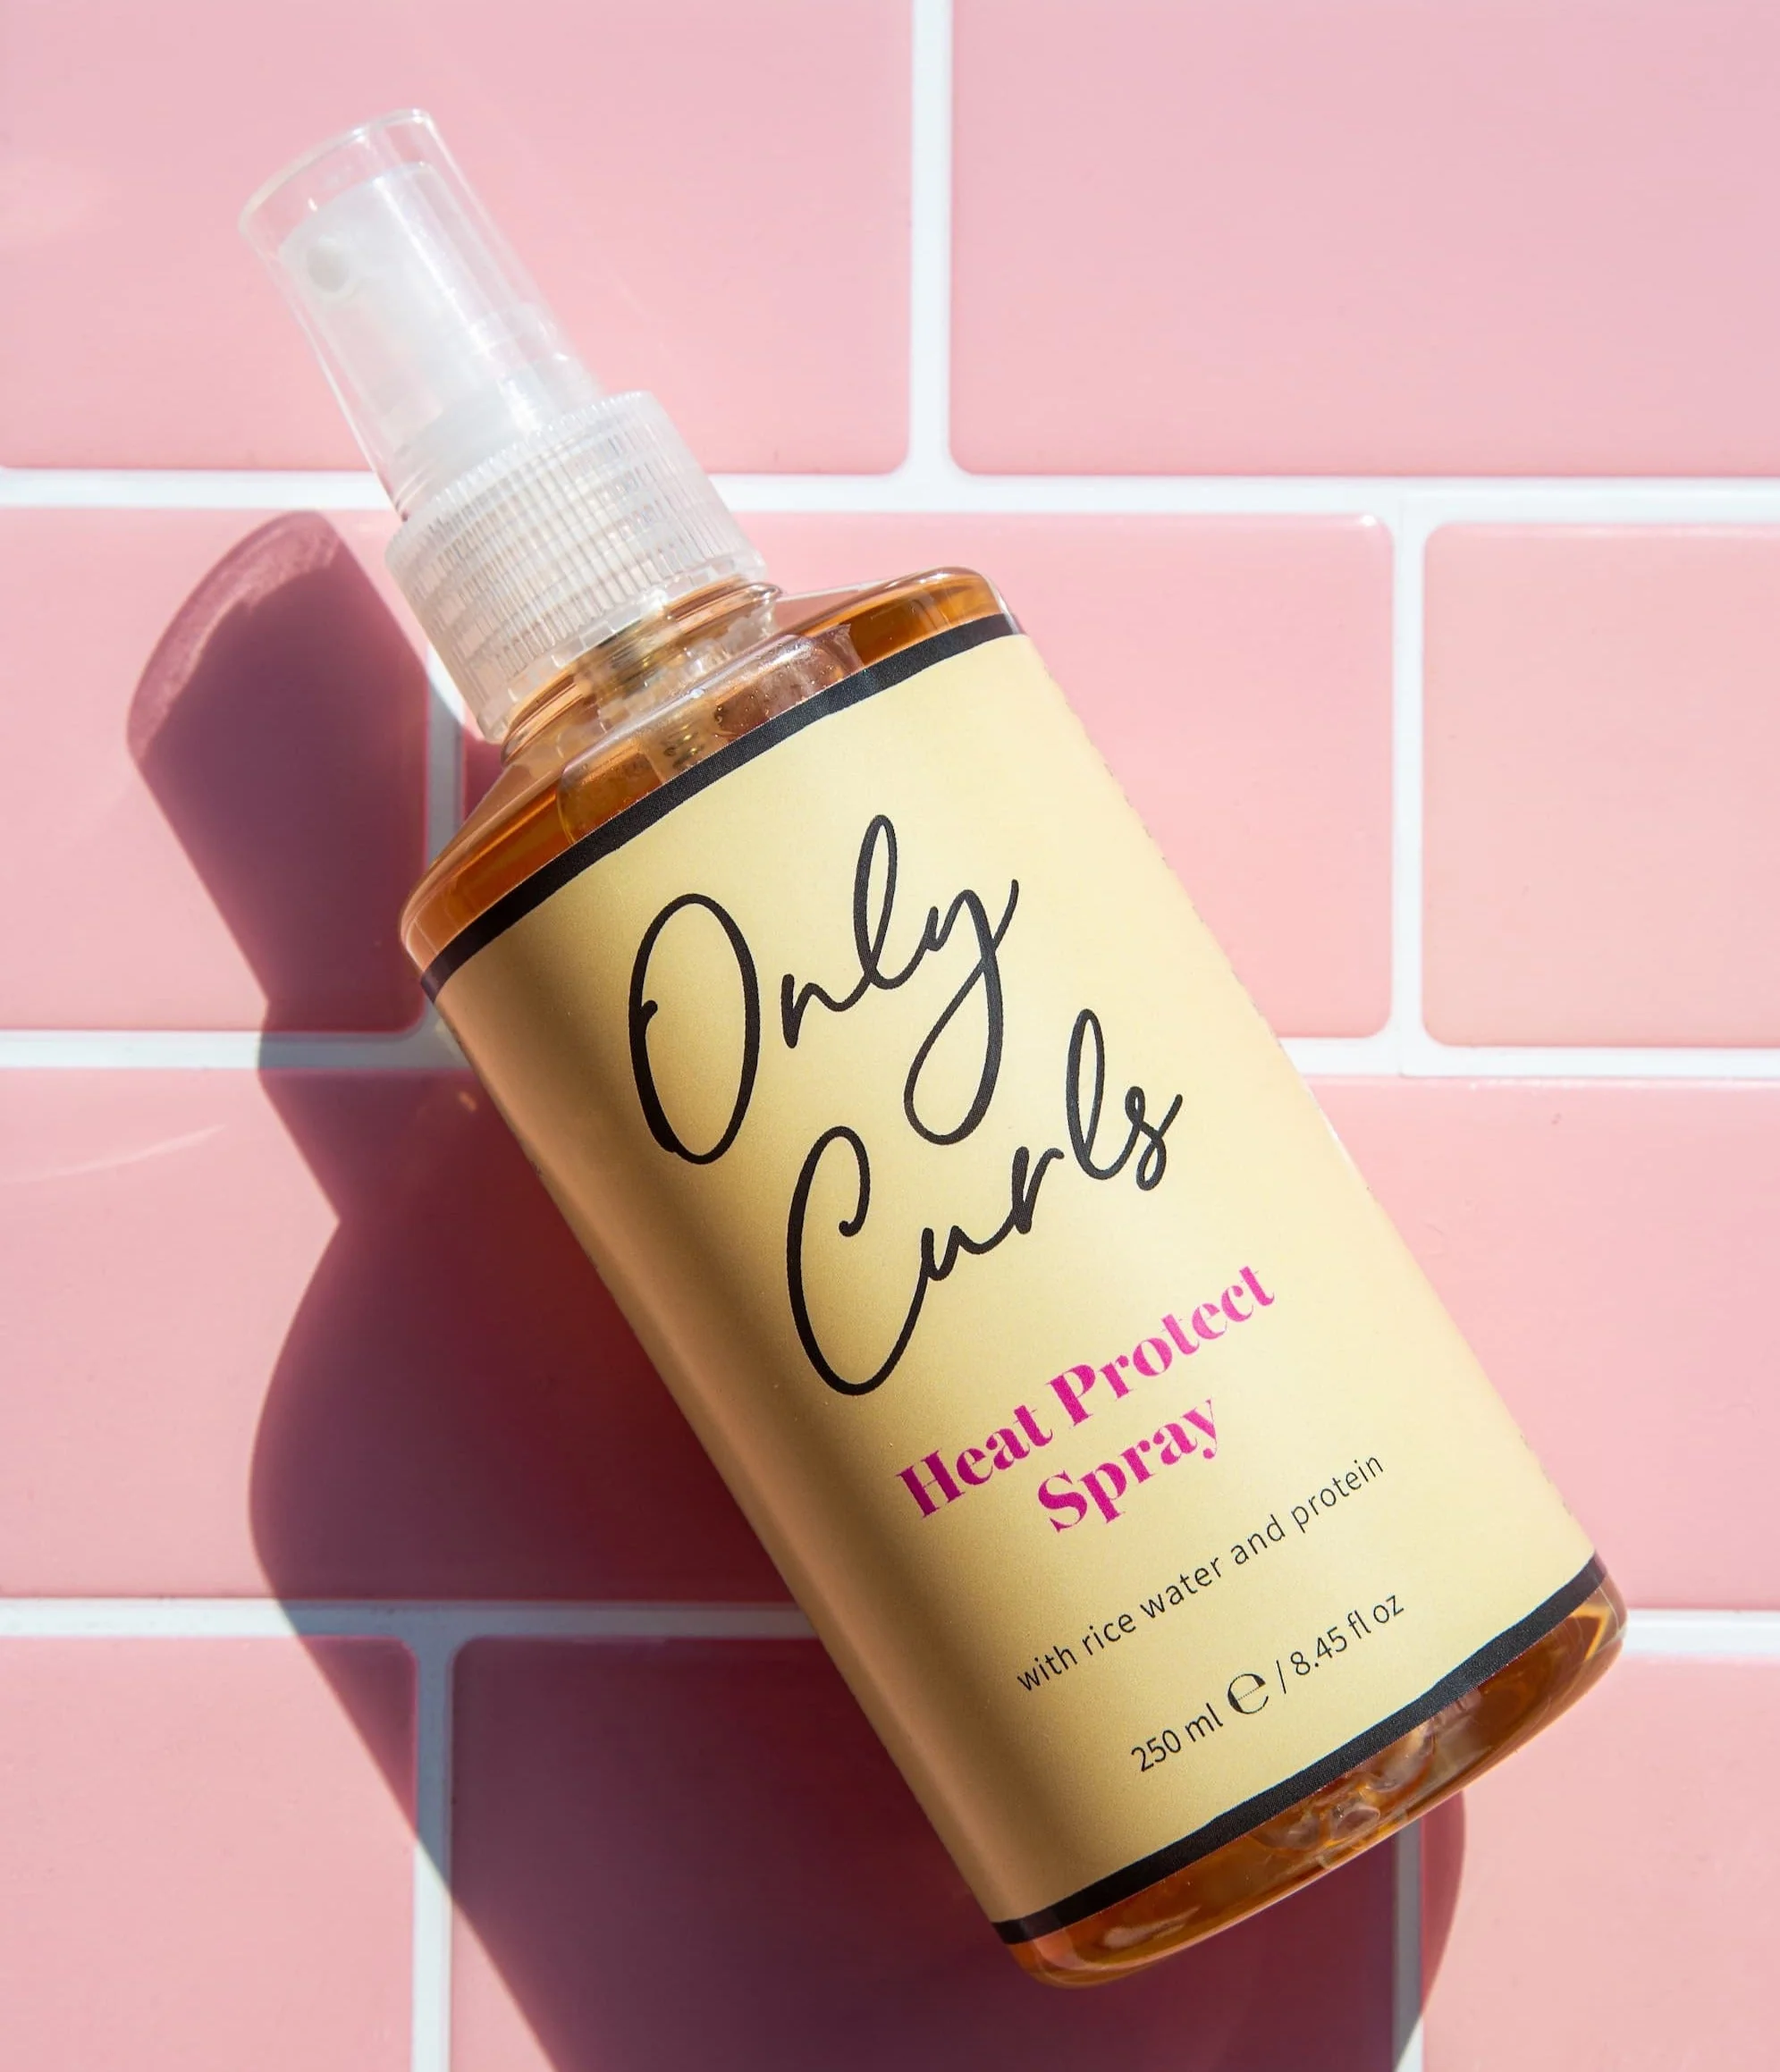 Only Curls Heat Protect Spray